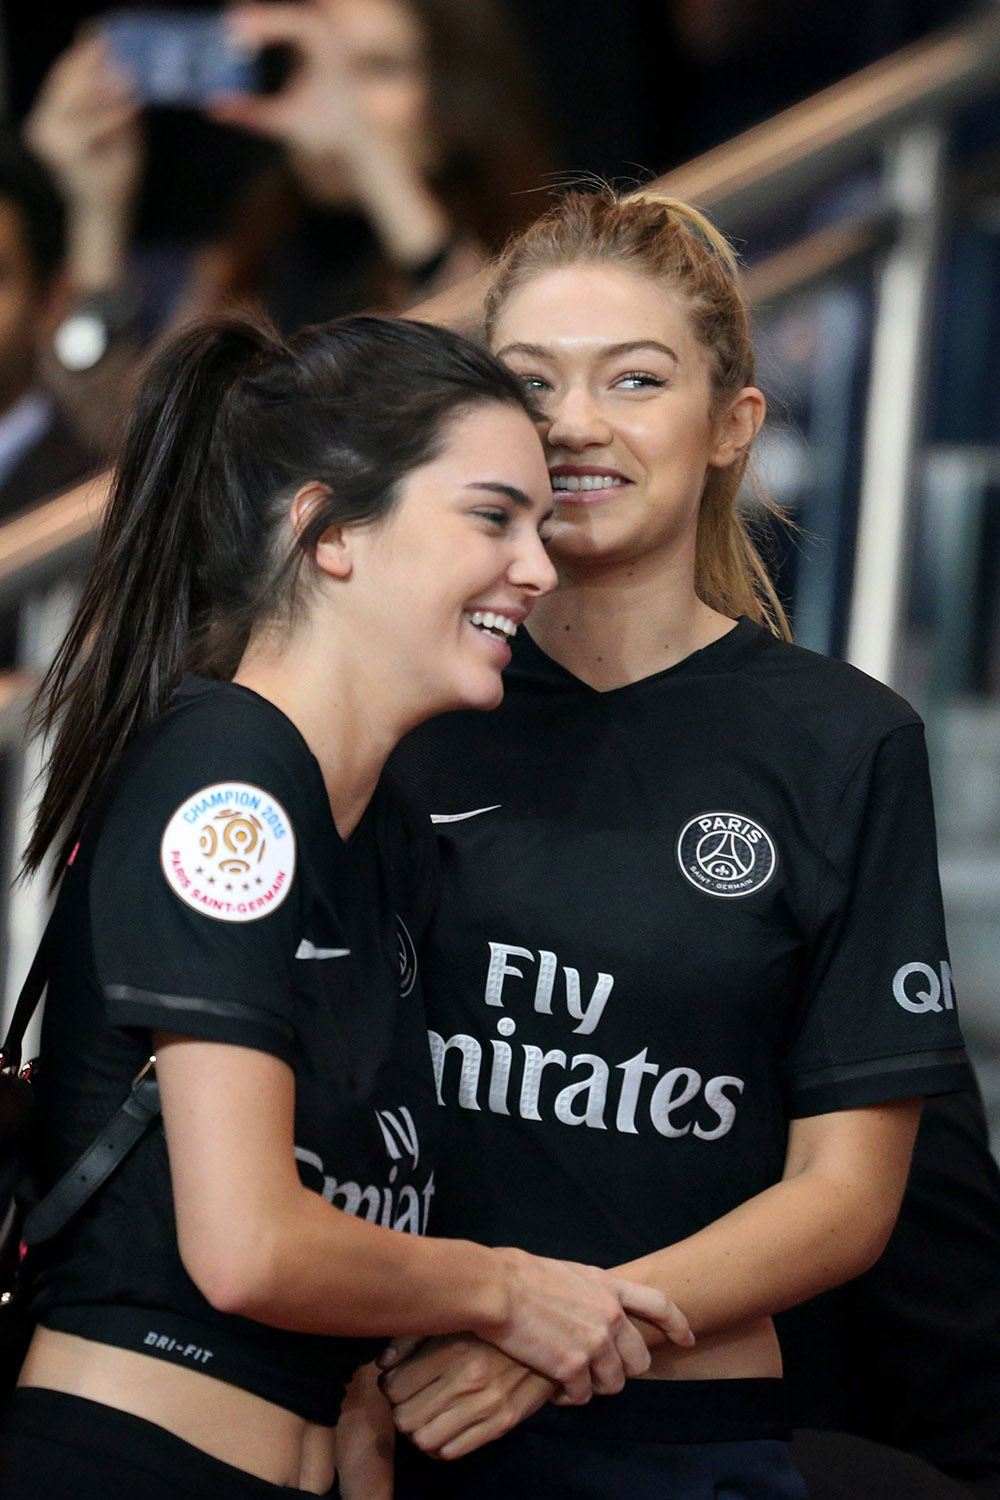 The supermodel duo look the part at the French Ligue 1 game between Paris Saint-Germain and Olympique de Marseille in October 2015.